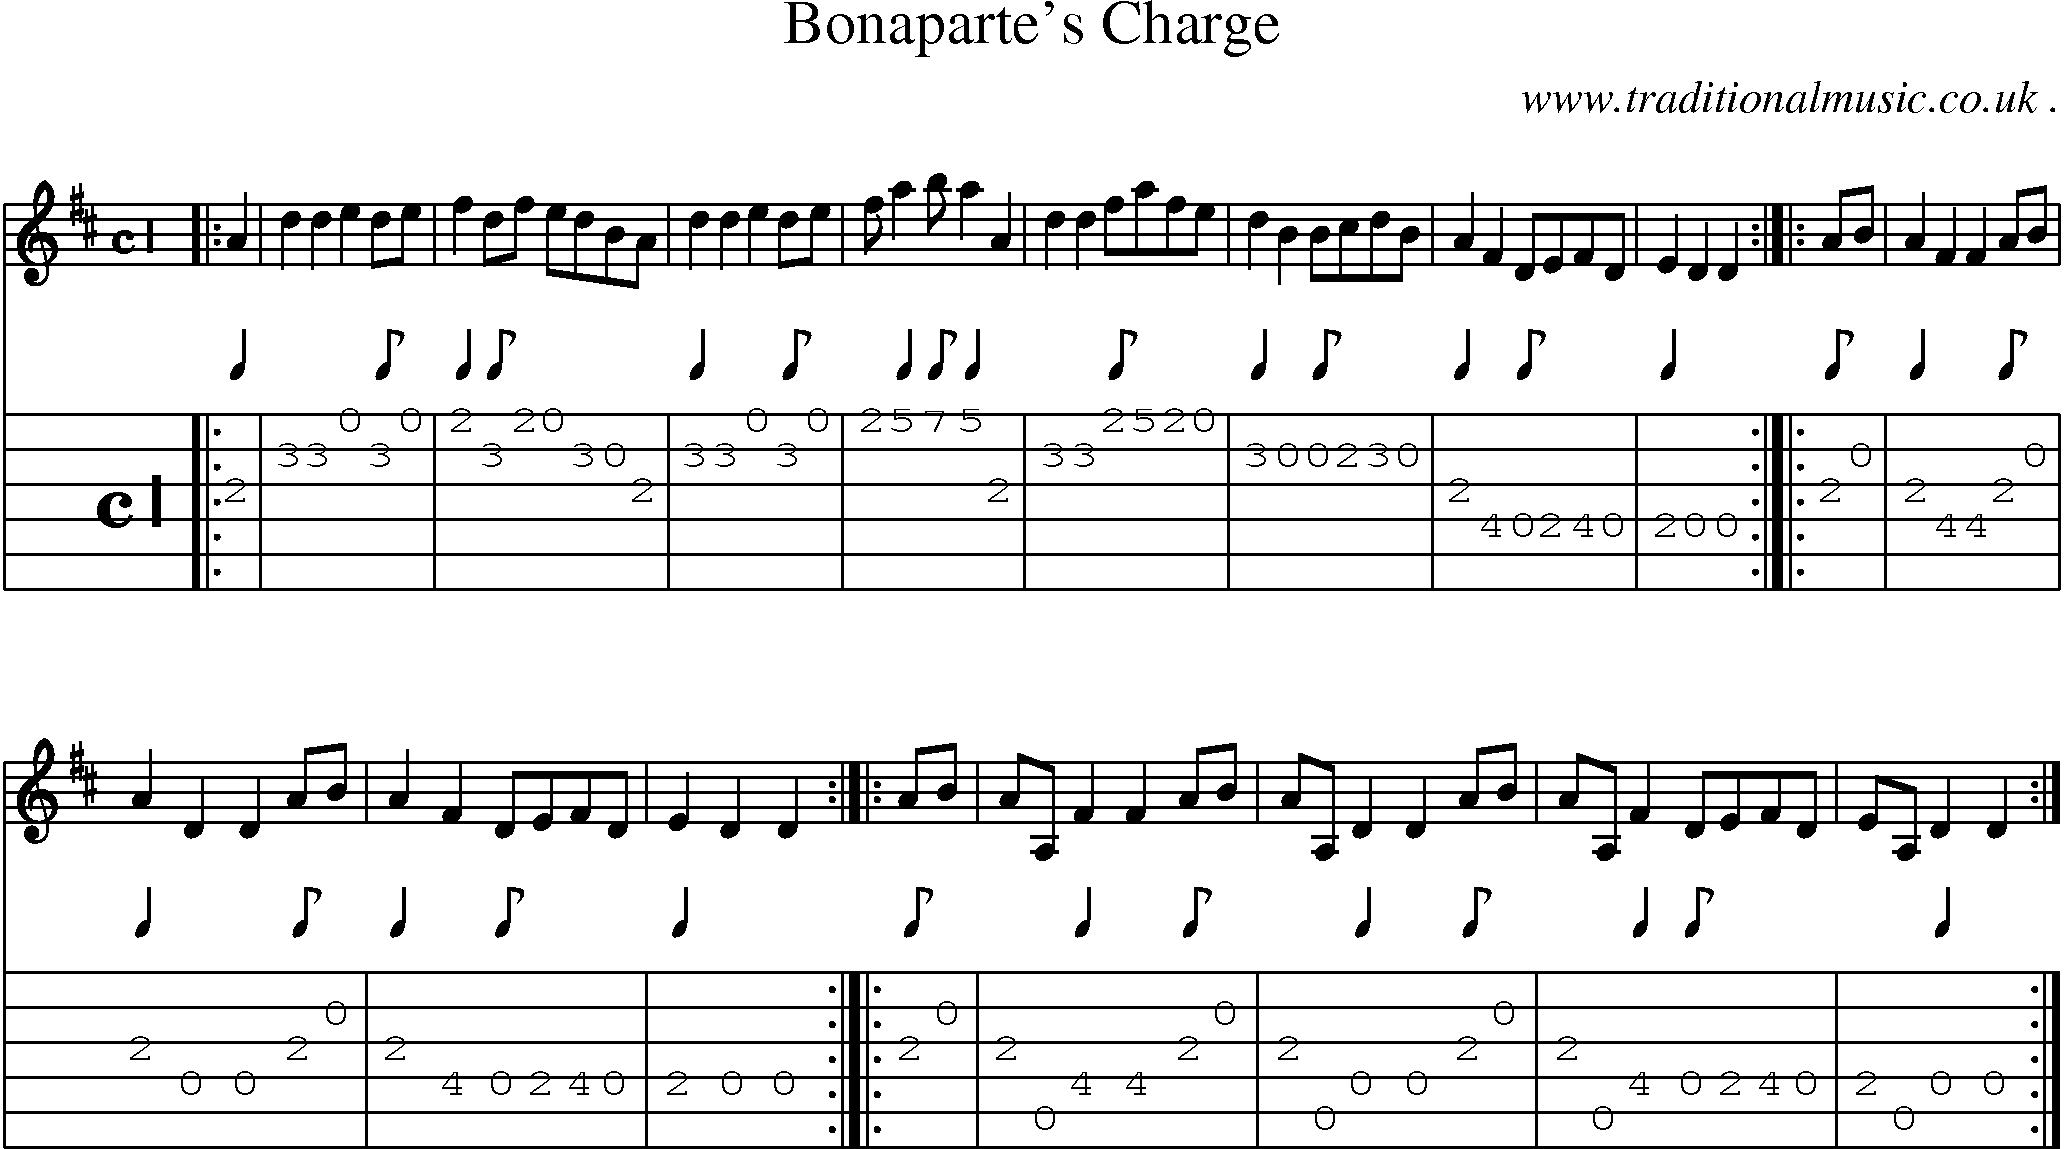 Sheet-Music and Guitar Tabs for Bonapartes Charge